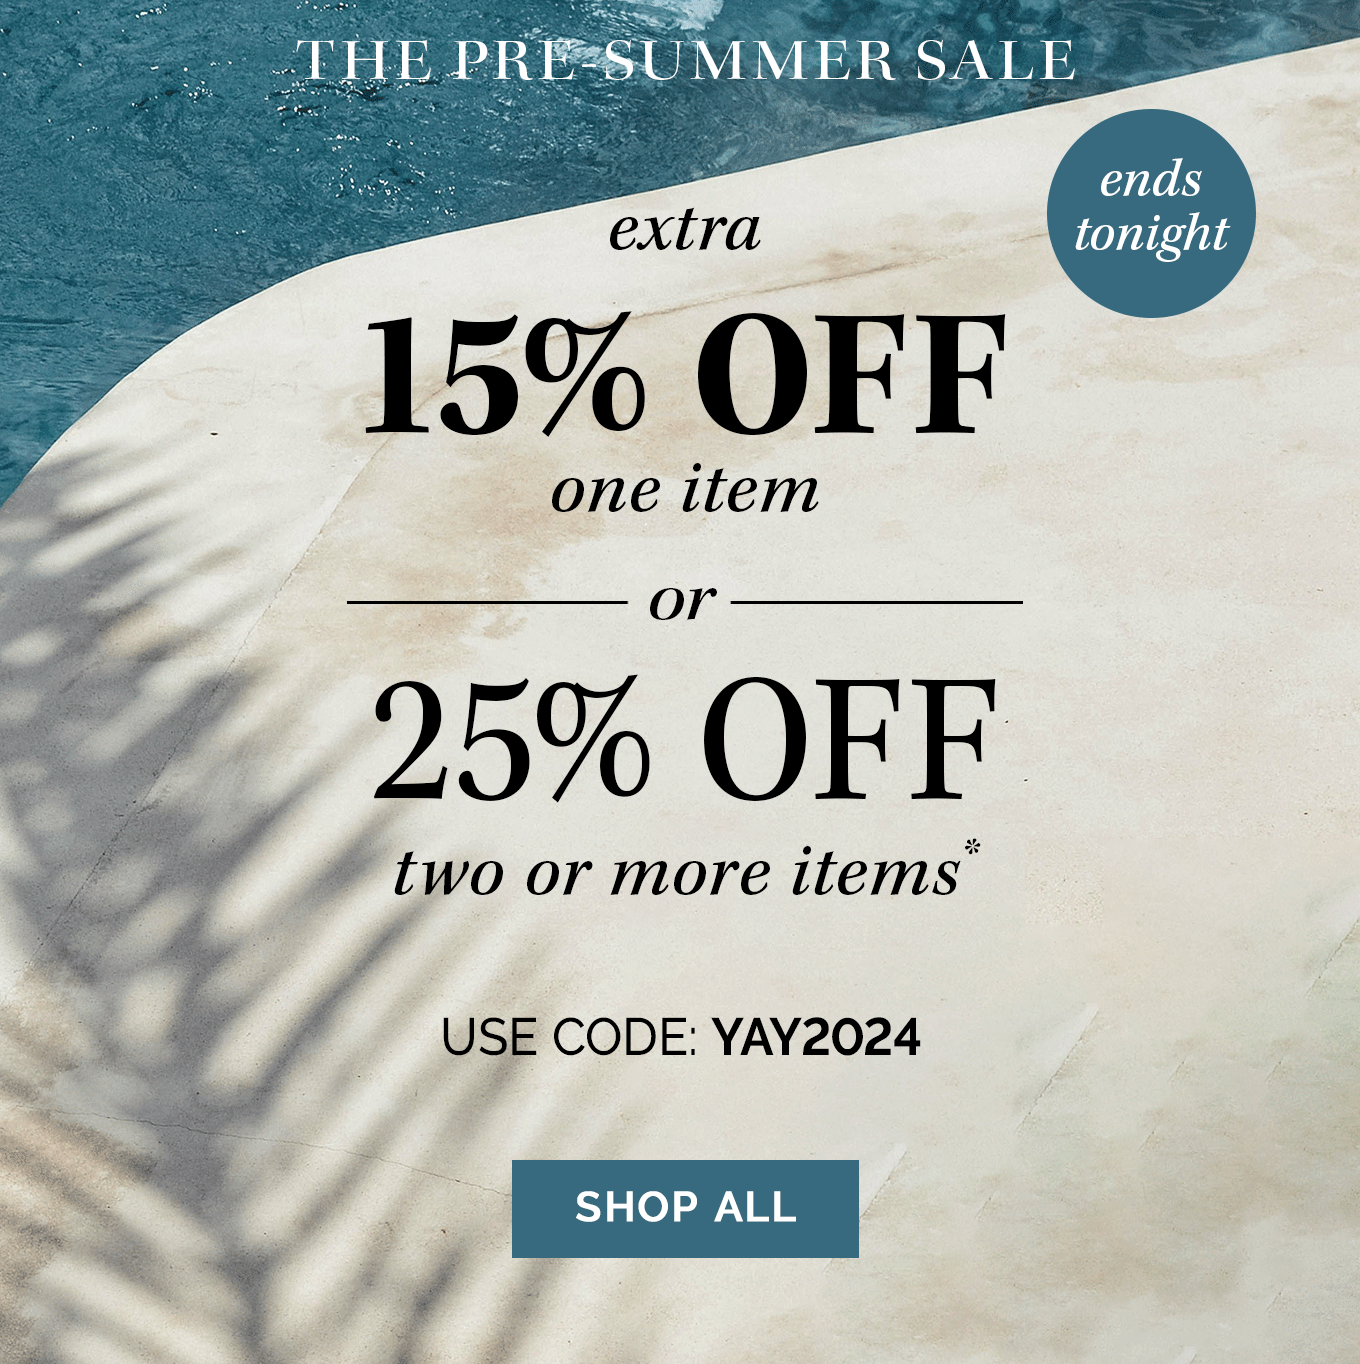 Ends Tonight | The Pre-Summer Sale! extra 15% OFF one item - or - 25% OFF two or more items* | use code: YAY2024